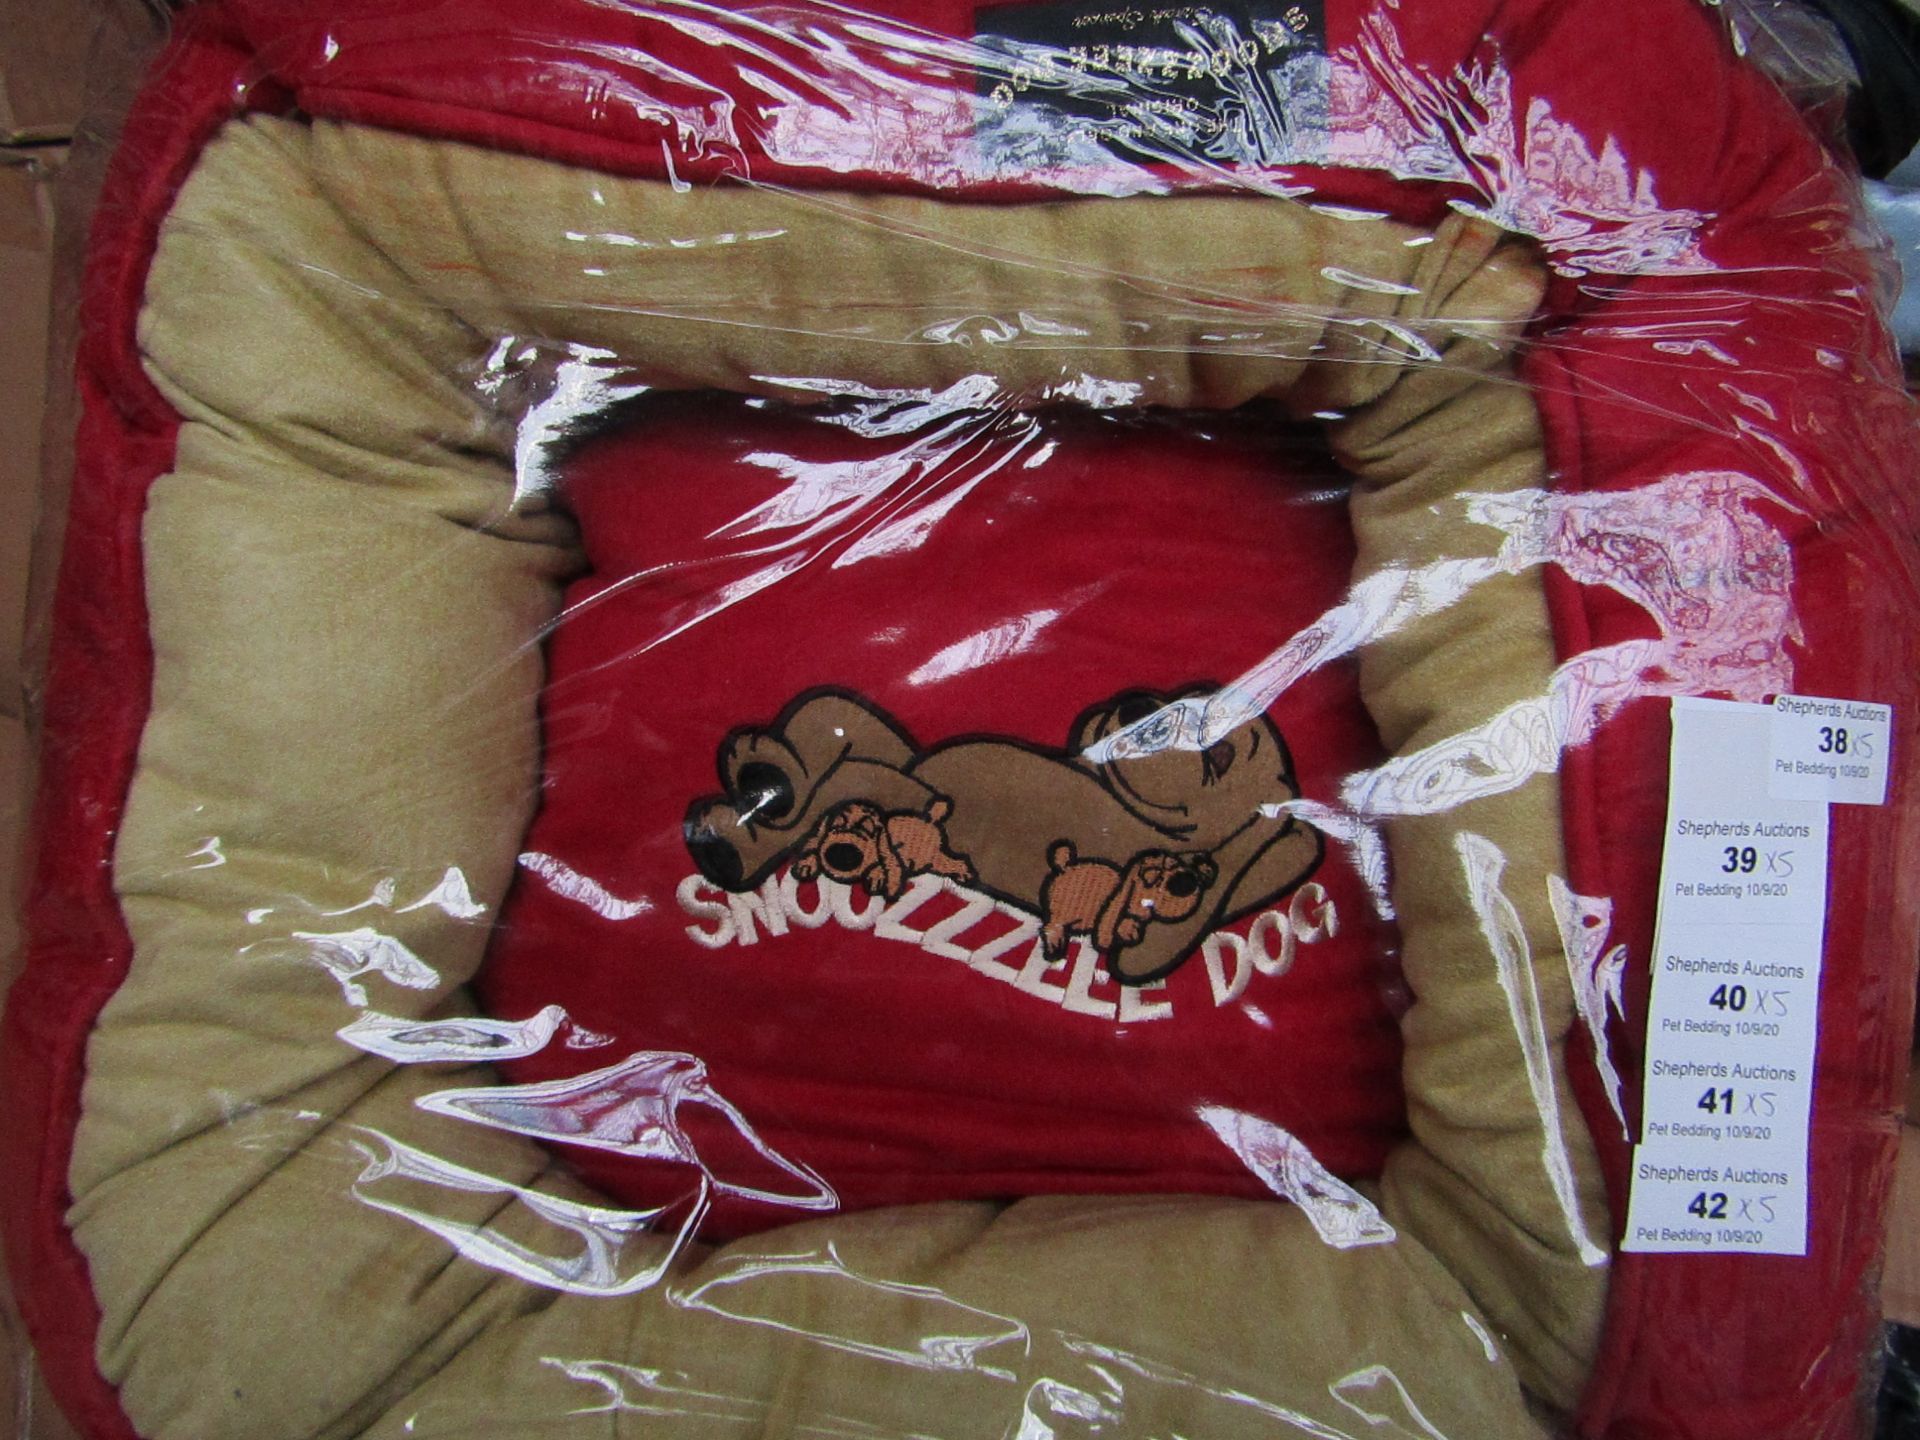 5x Snoozzzeee Dog - Cherry Red Donut Dog Bed (Size 1 Approx 19/20") - All New & Packaged.